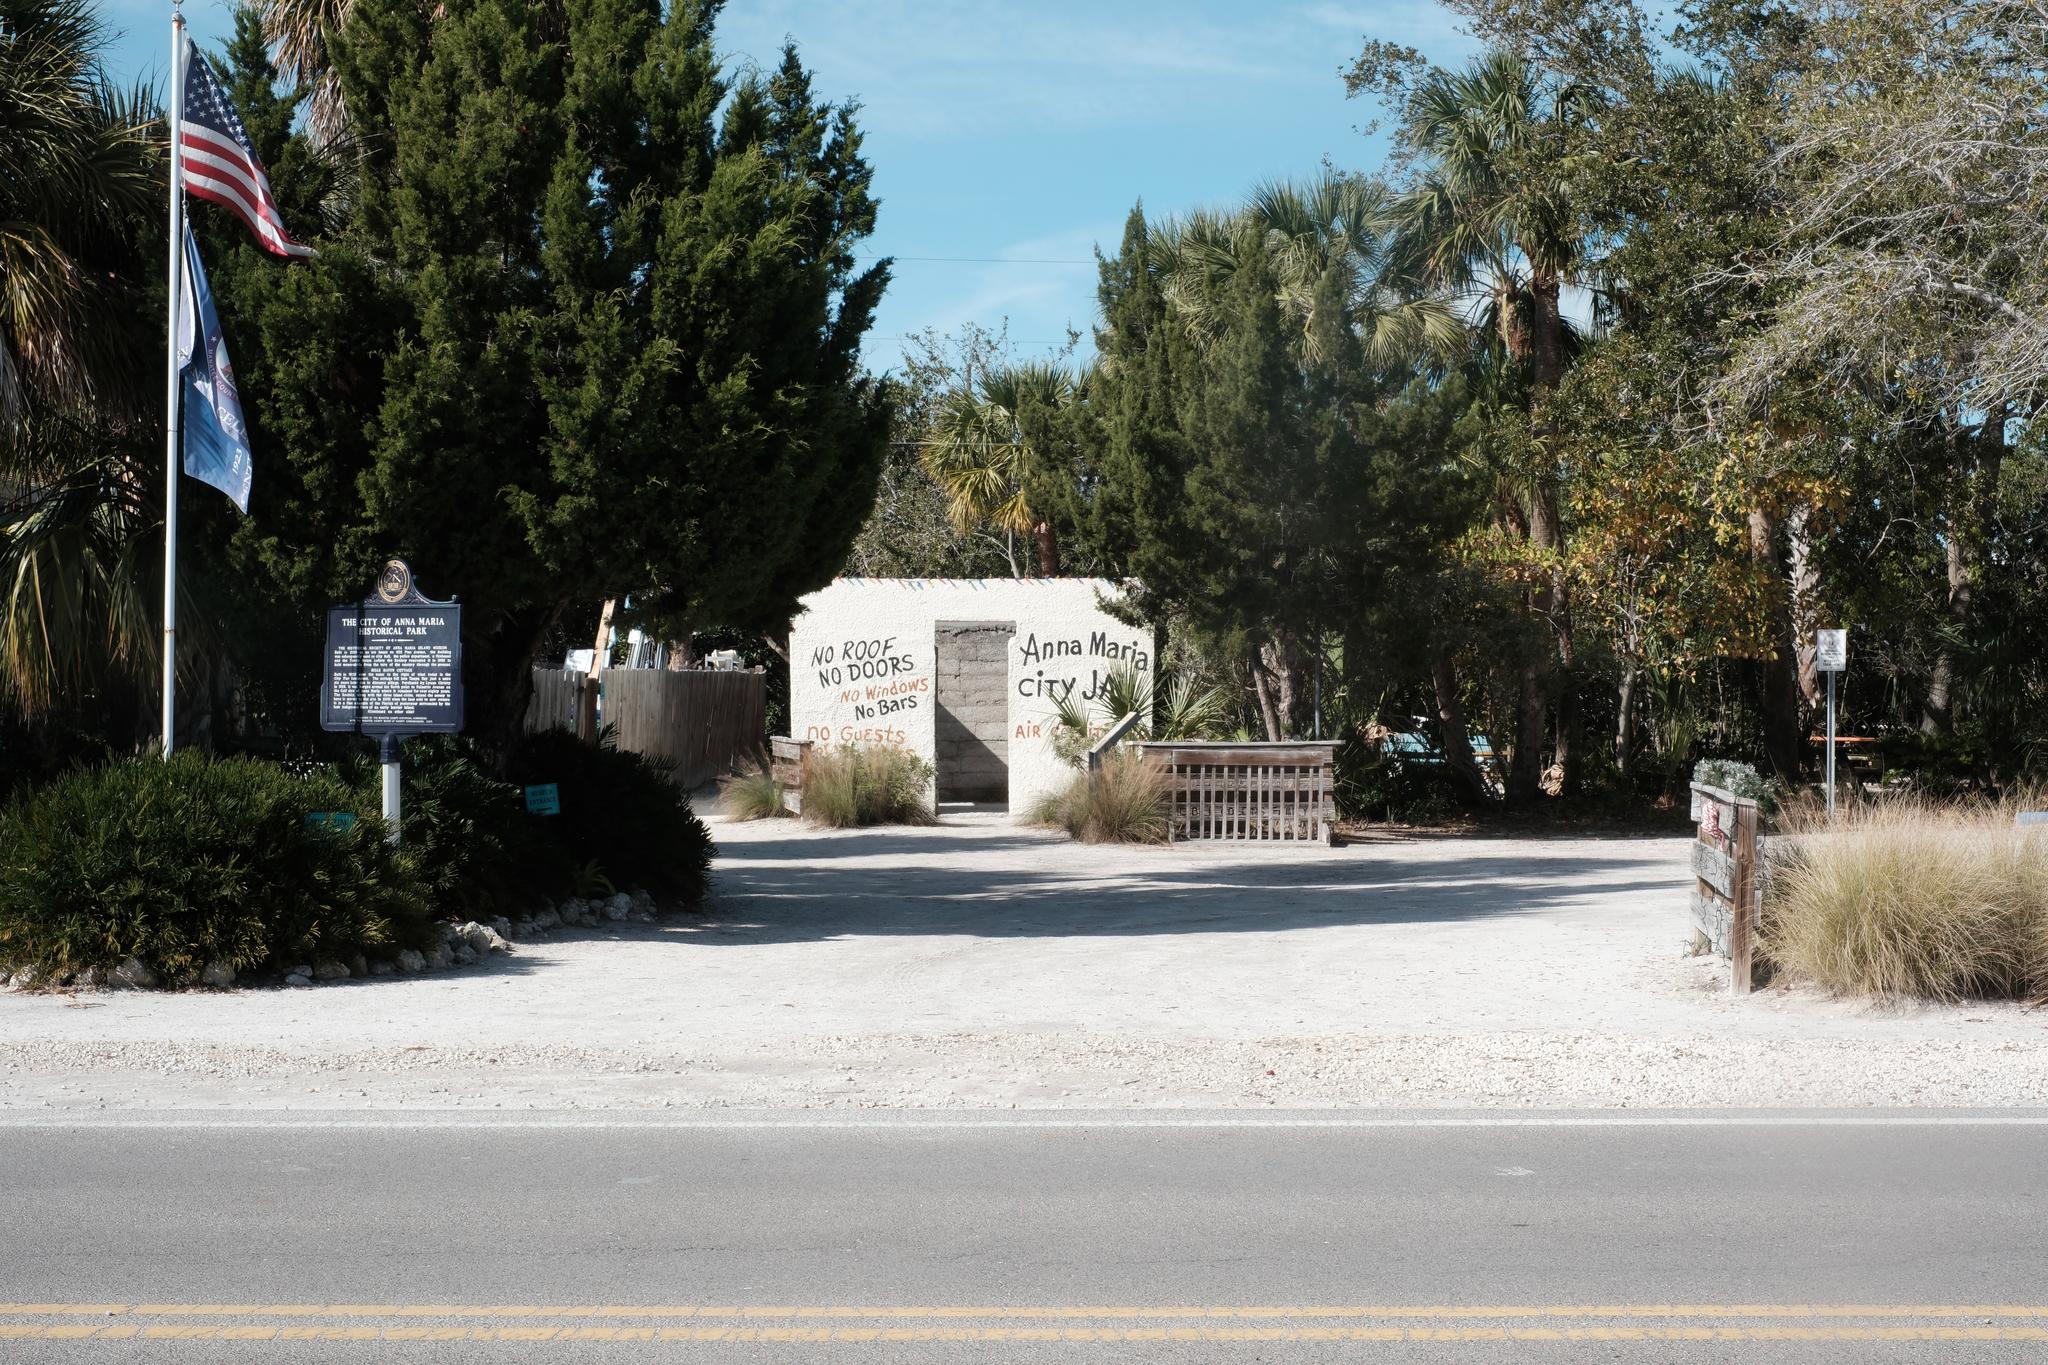 A gated entrance to a park or garden area, with a white building in the background, surrounded by trees and greenery. An American flag and another flag are visible on the left side, along with a sign. The ground is covered with gravel, and a road runs in the foreground